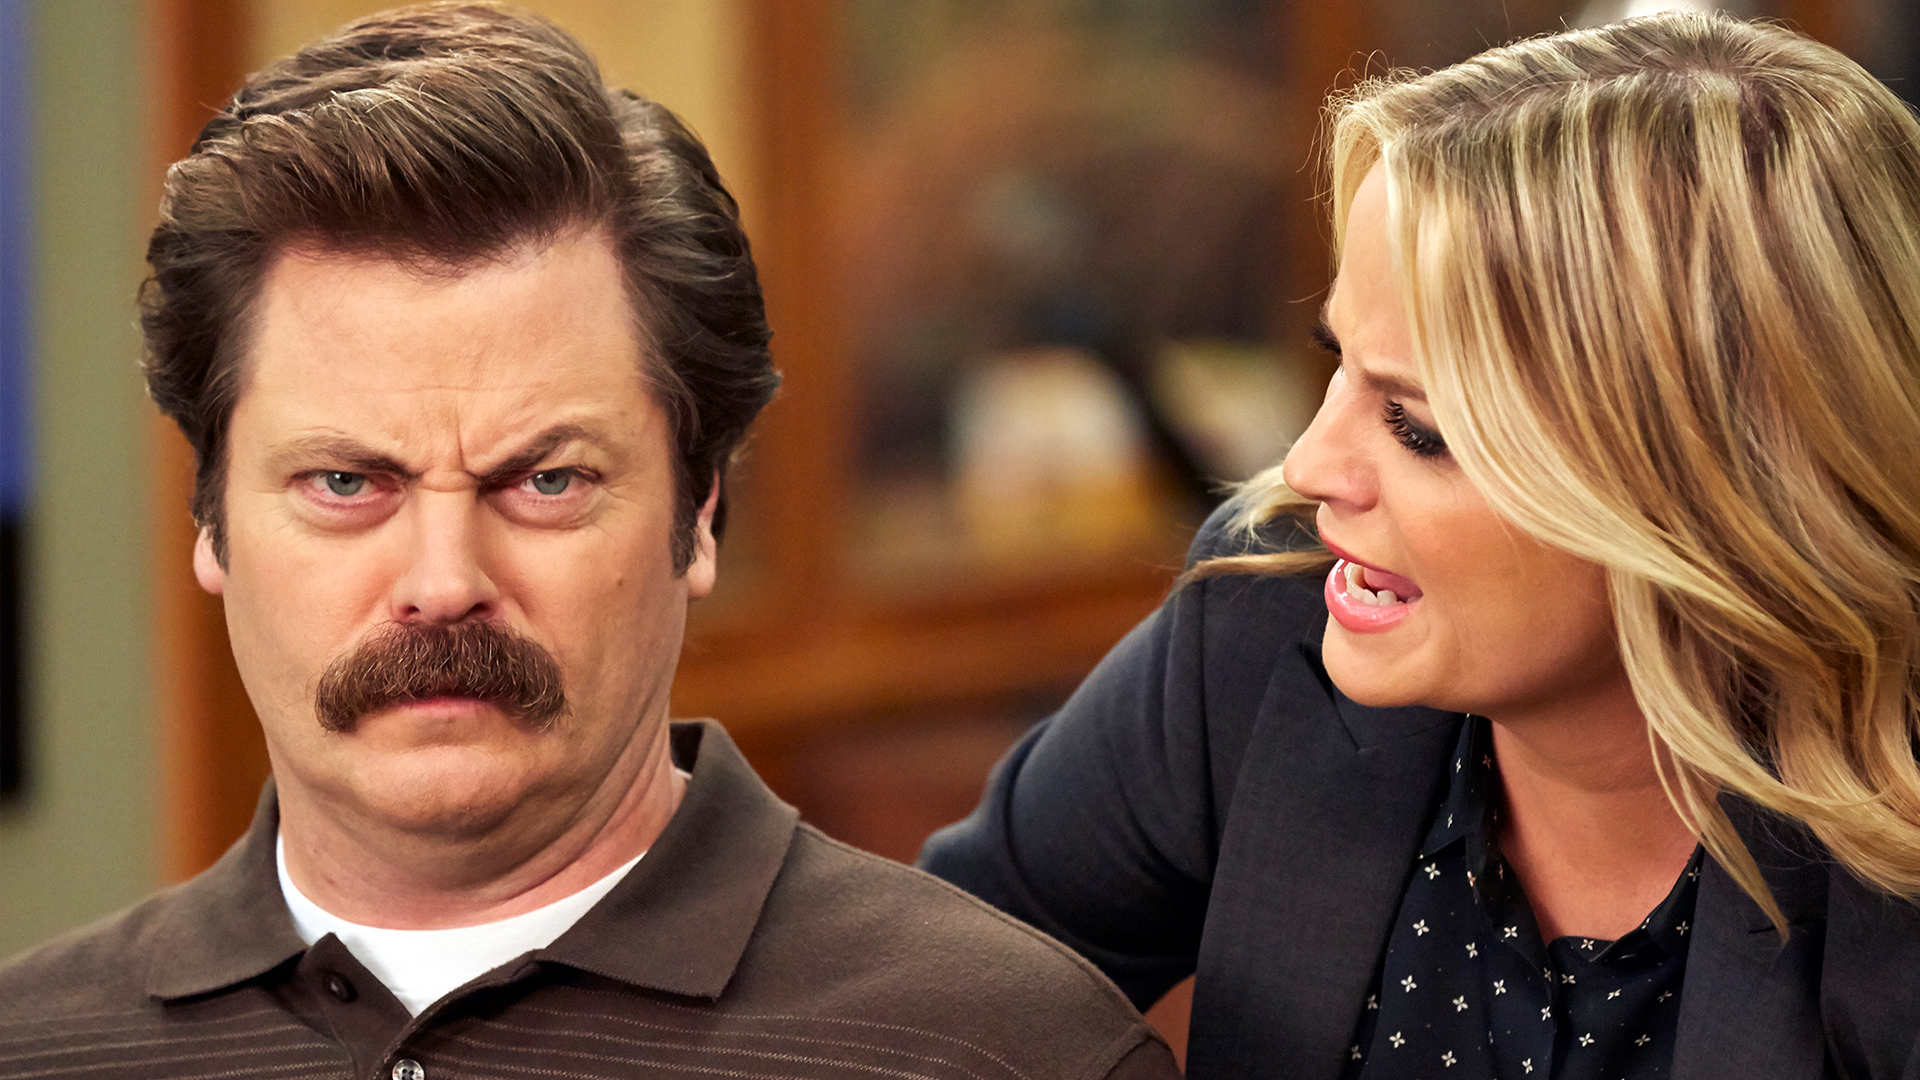 Watch Parks and Recreation Season 7 Episode 11 | Stream Full Episodes